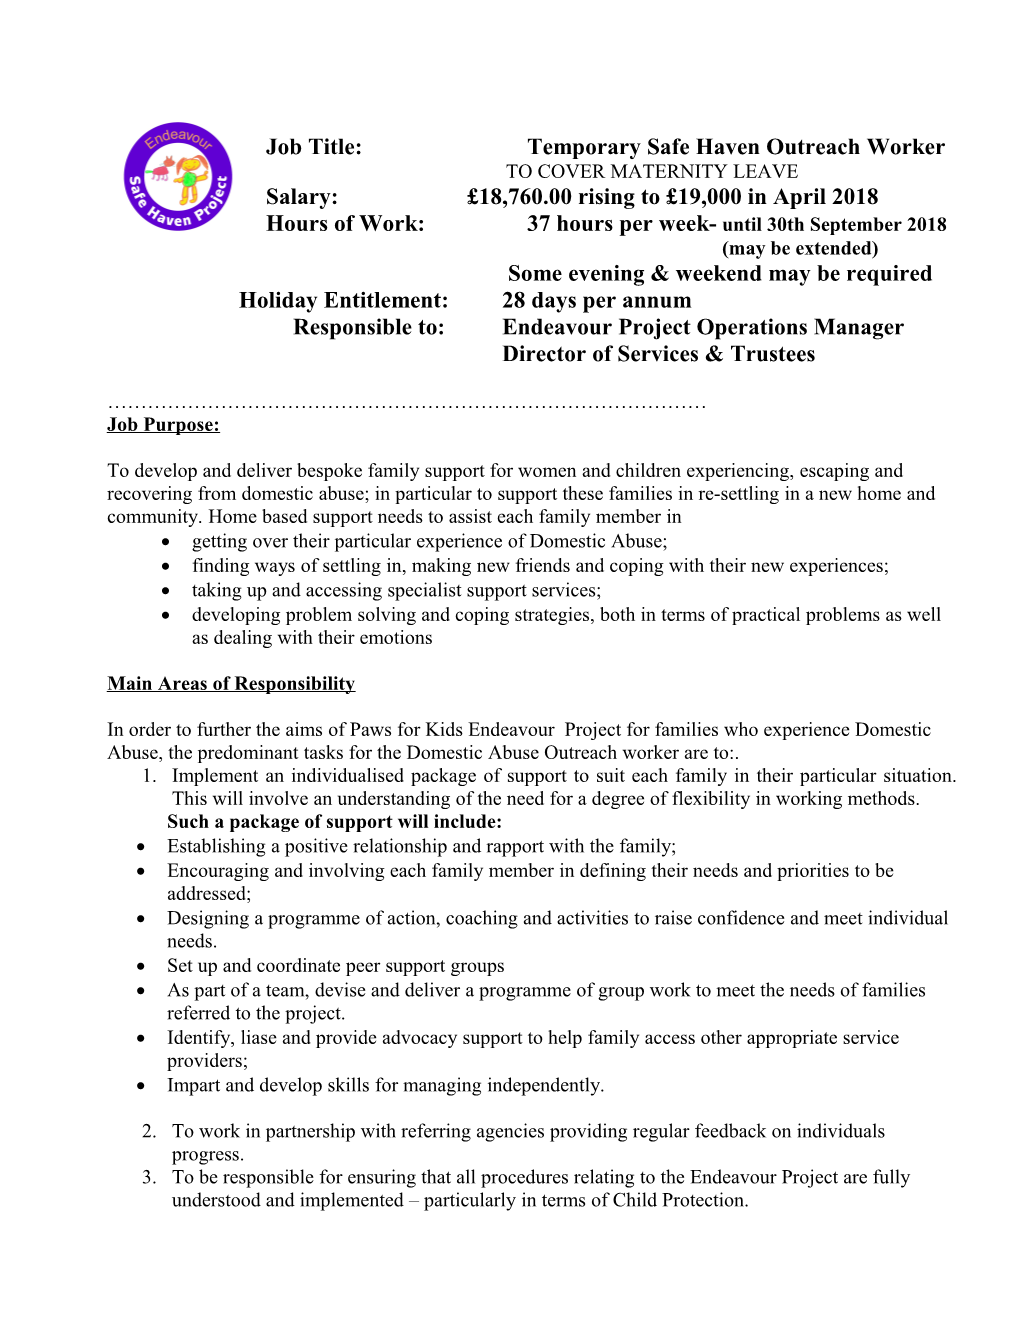 Job Title: Temporary Safe Haven Outreach Worker